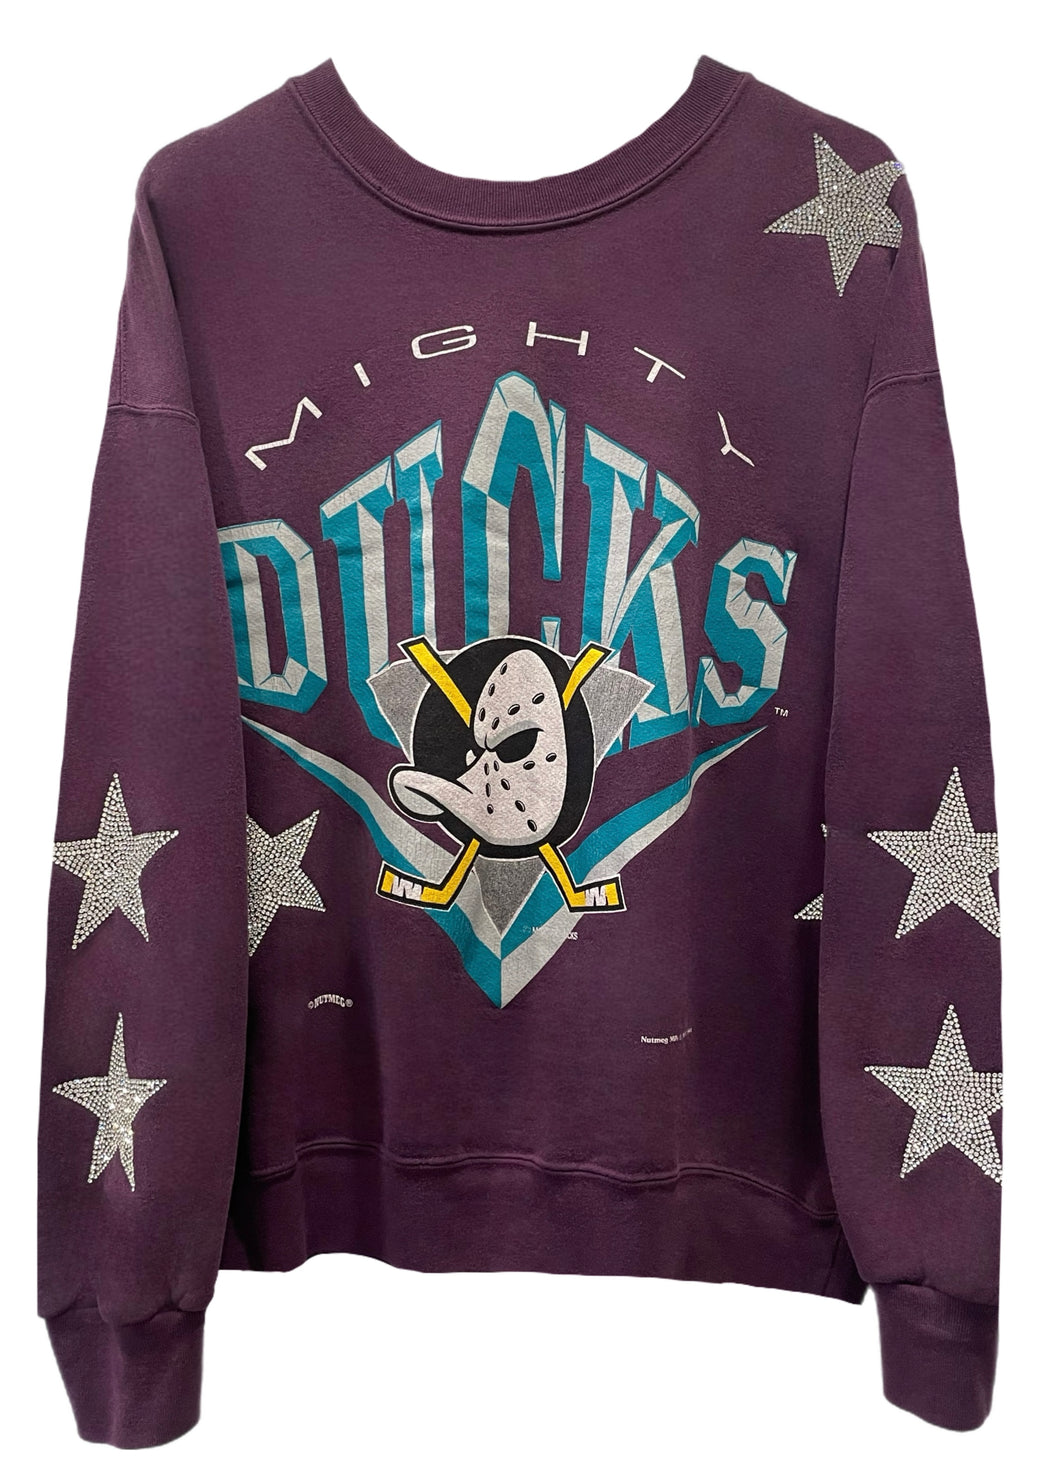 Anaheim Ducks, NHL One of a KIND Vintage “Mighty Ducks” Rare Find 1994 Sweatshirt with All Over Crystal Star Design - Size: Large